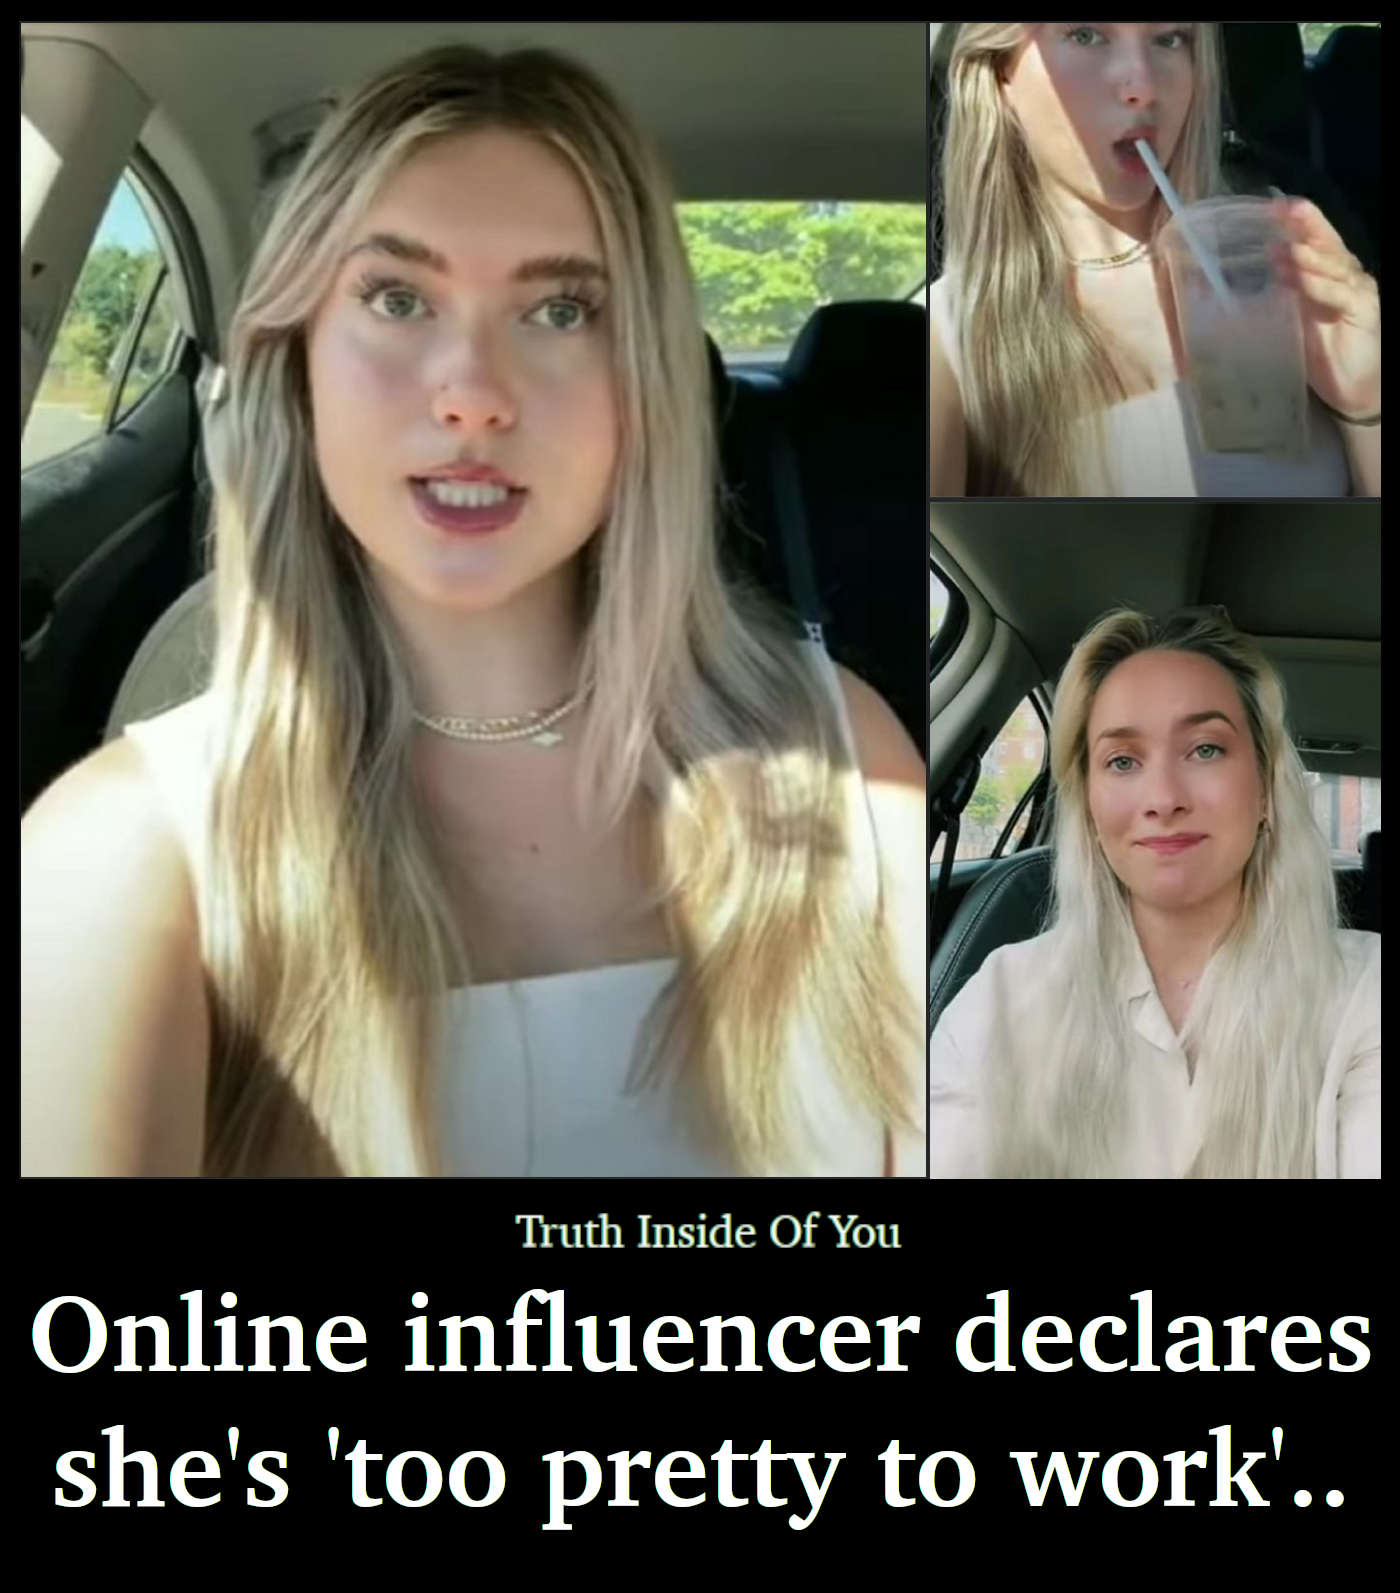 Online influencer declares she's 'too pretty to work'